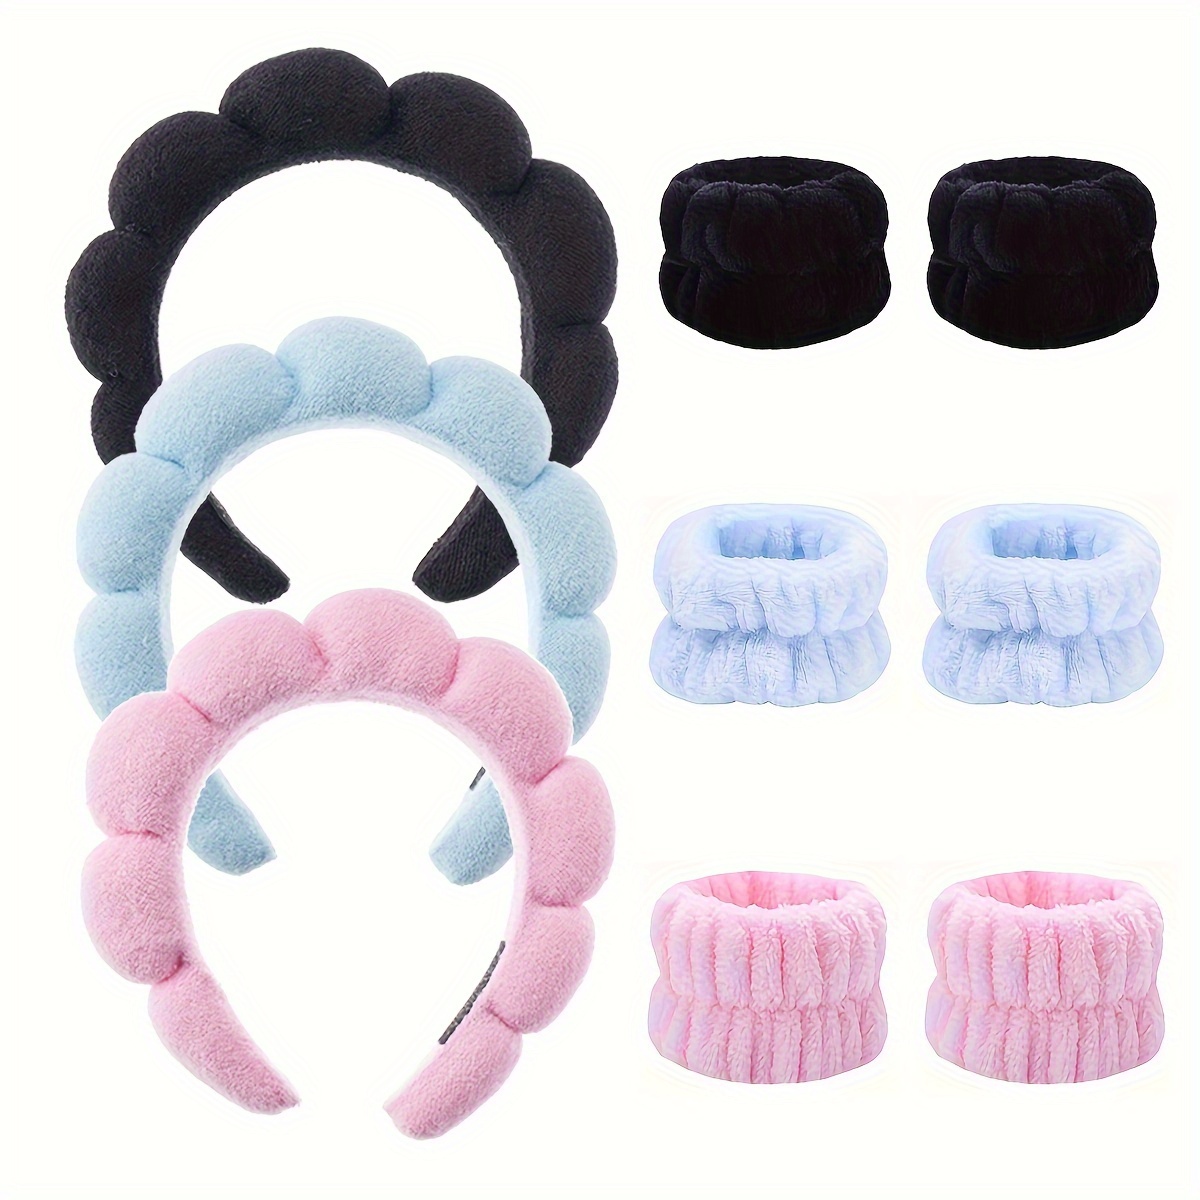 

3pcs Sweet Fried Dough Twists Hair Band Simple Face Wash Elastic Wrist Band For Women's Spa Makeup Skin Care Sponge Hair Band